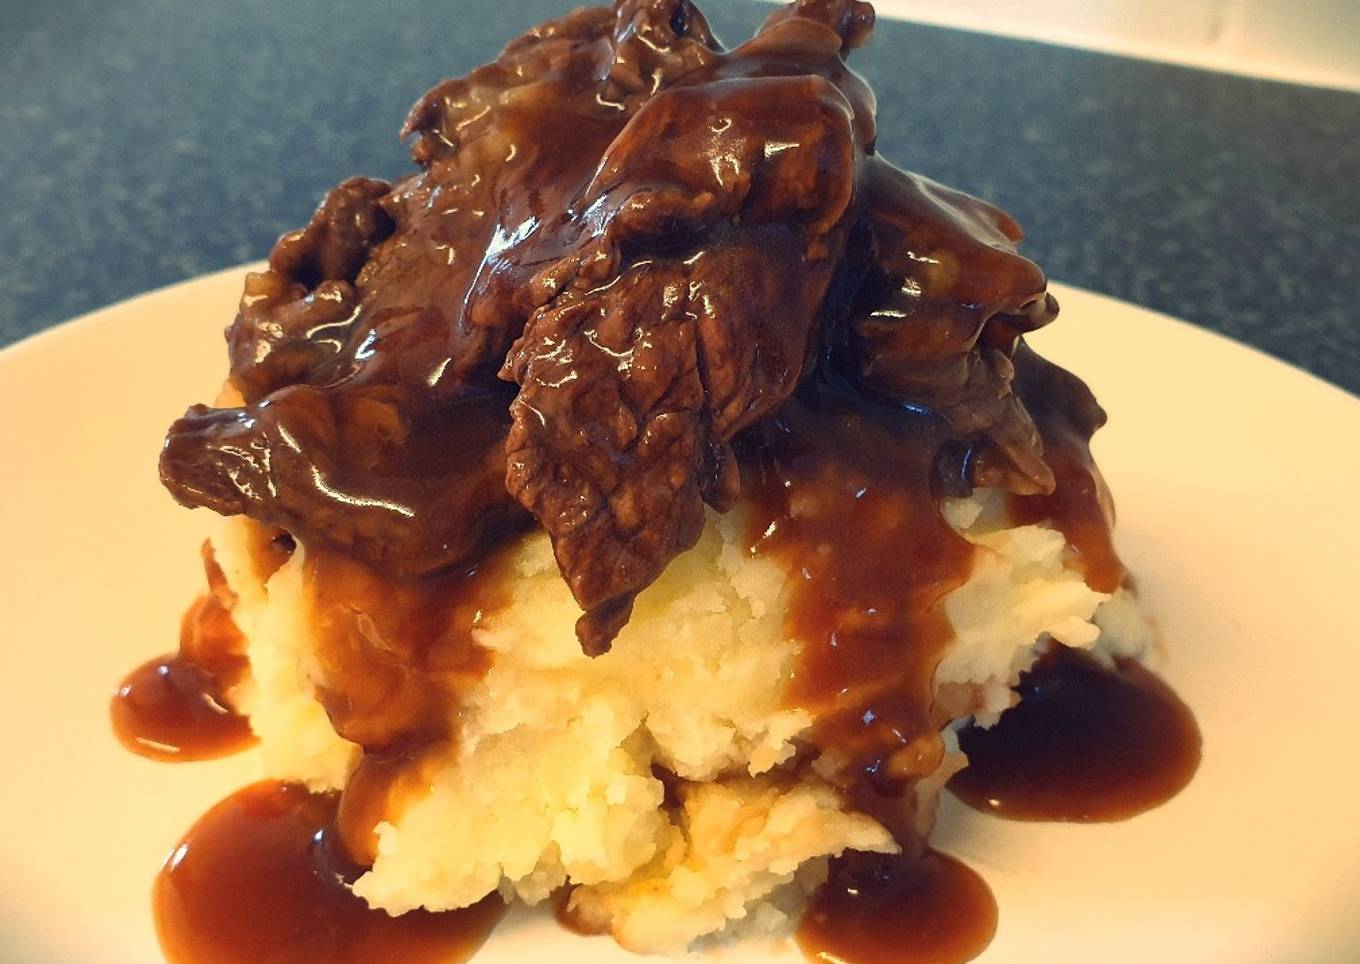 Creamy Mashed Potato with 5 hour Slow Cooked Beef & Gravy